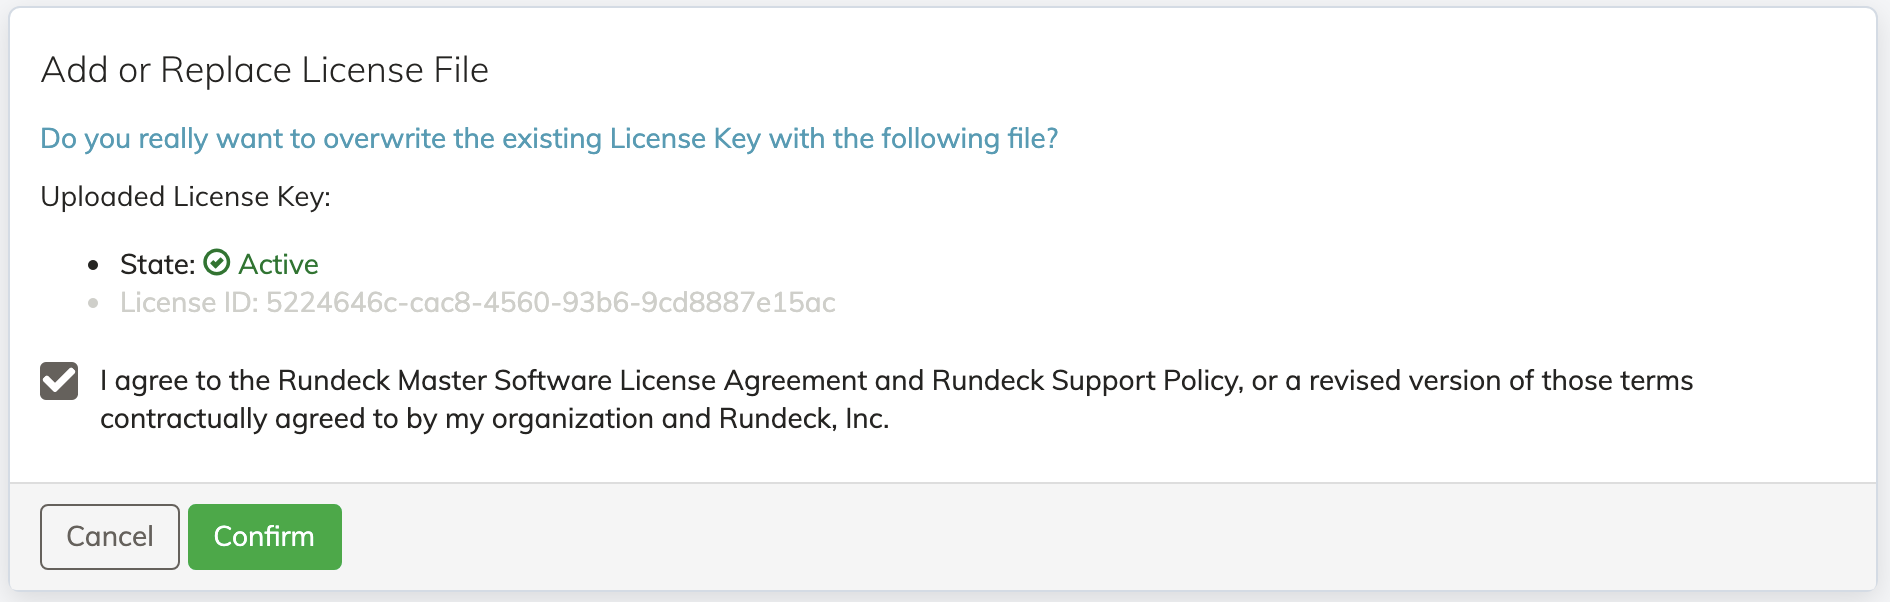 Agree to the Rundeck Master Software License Agreement